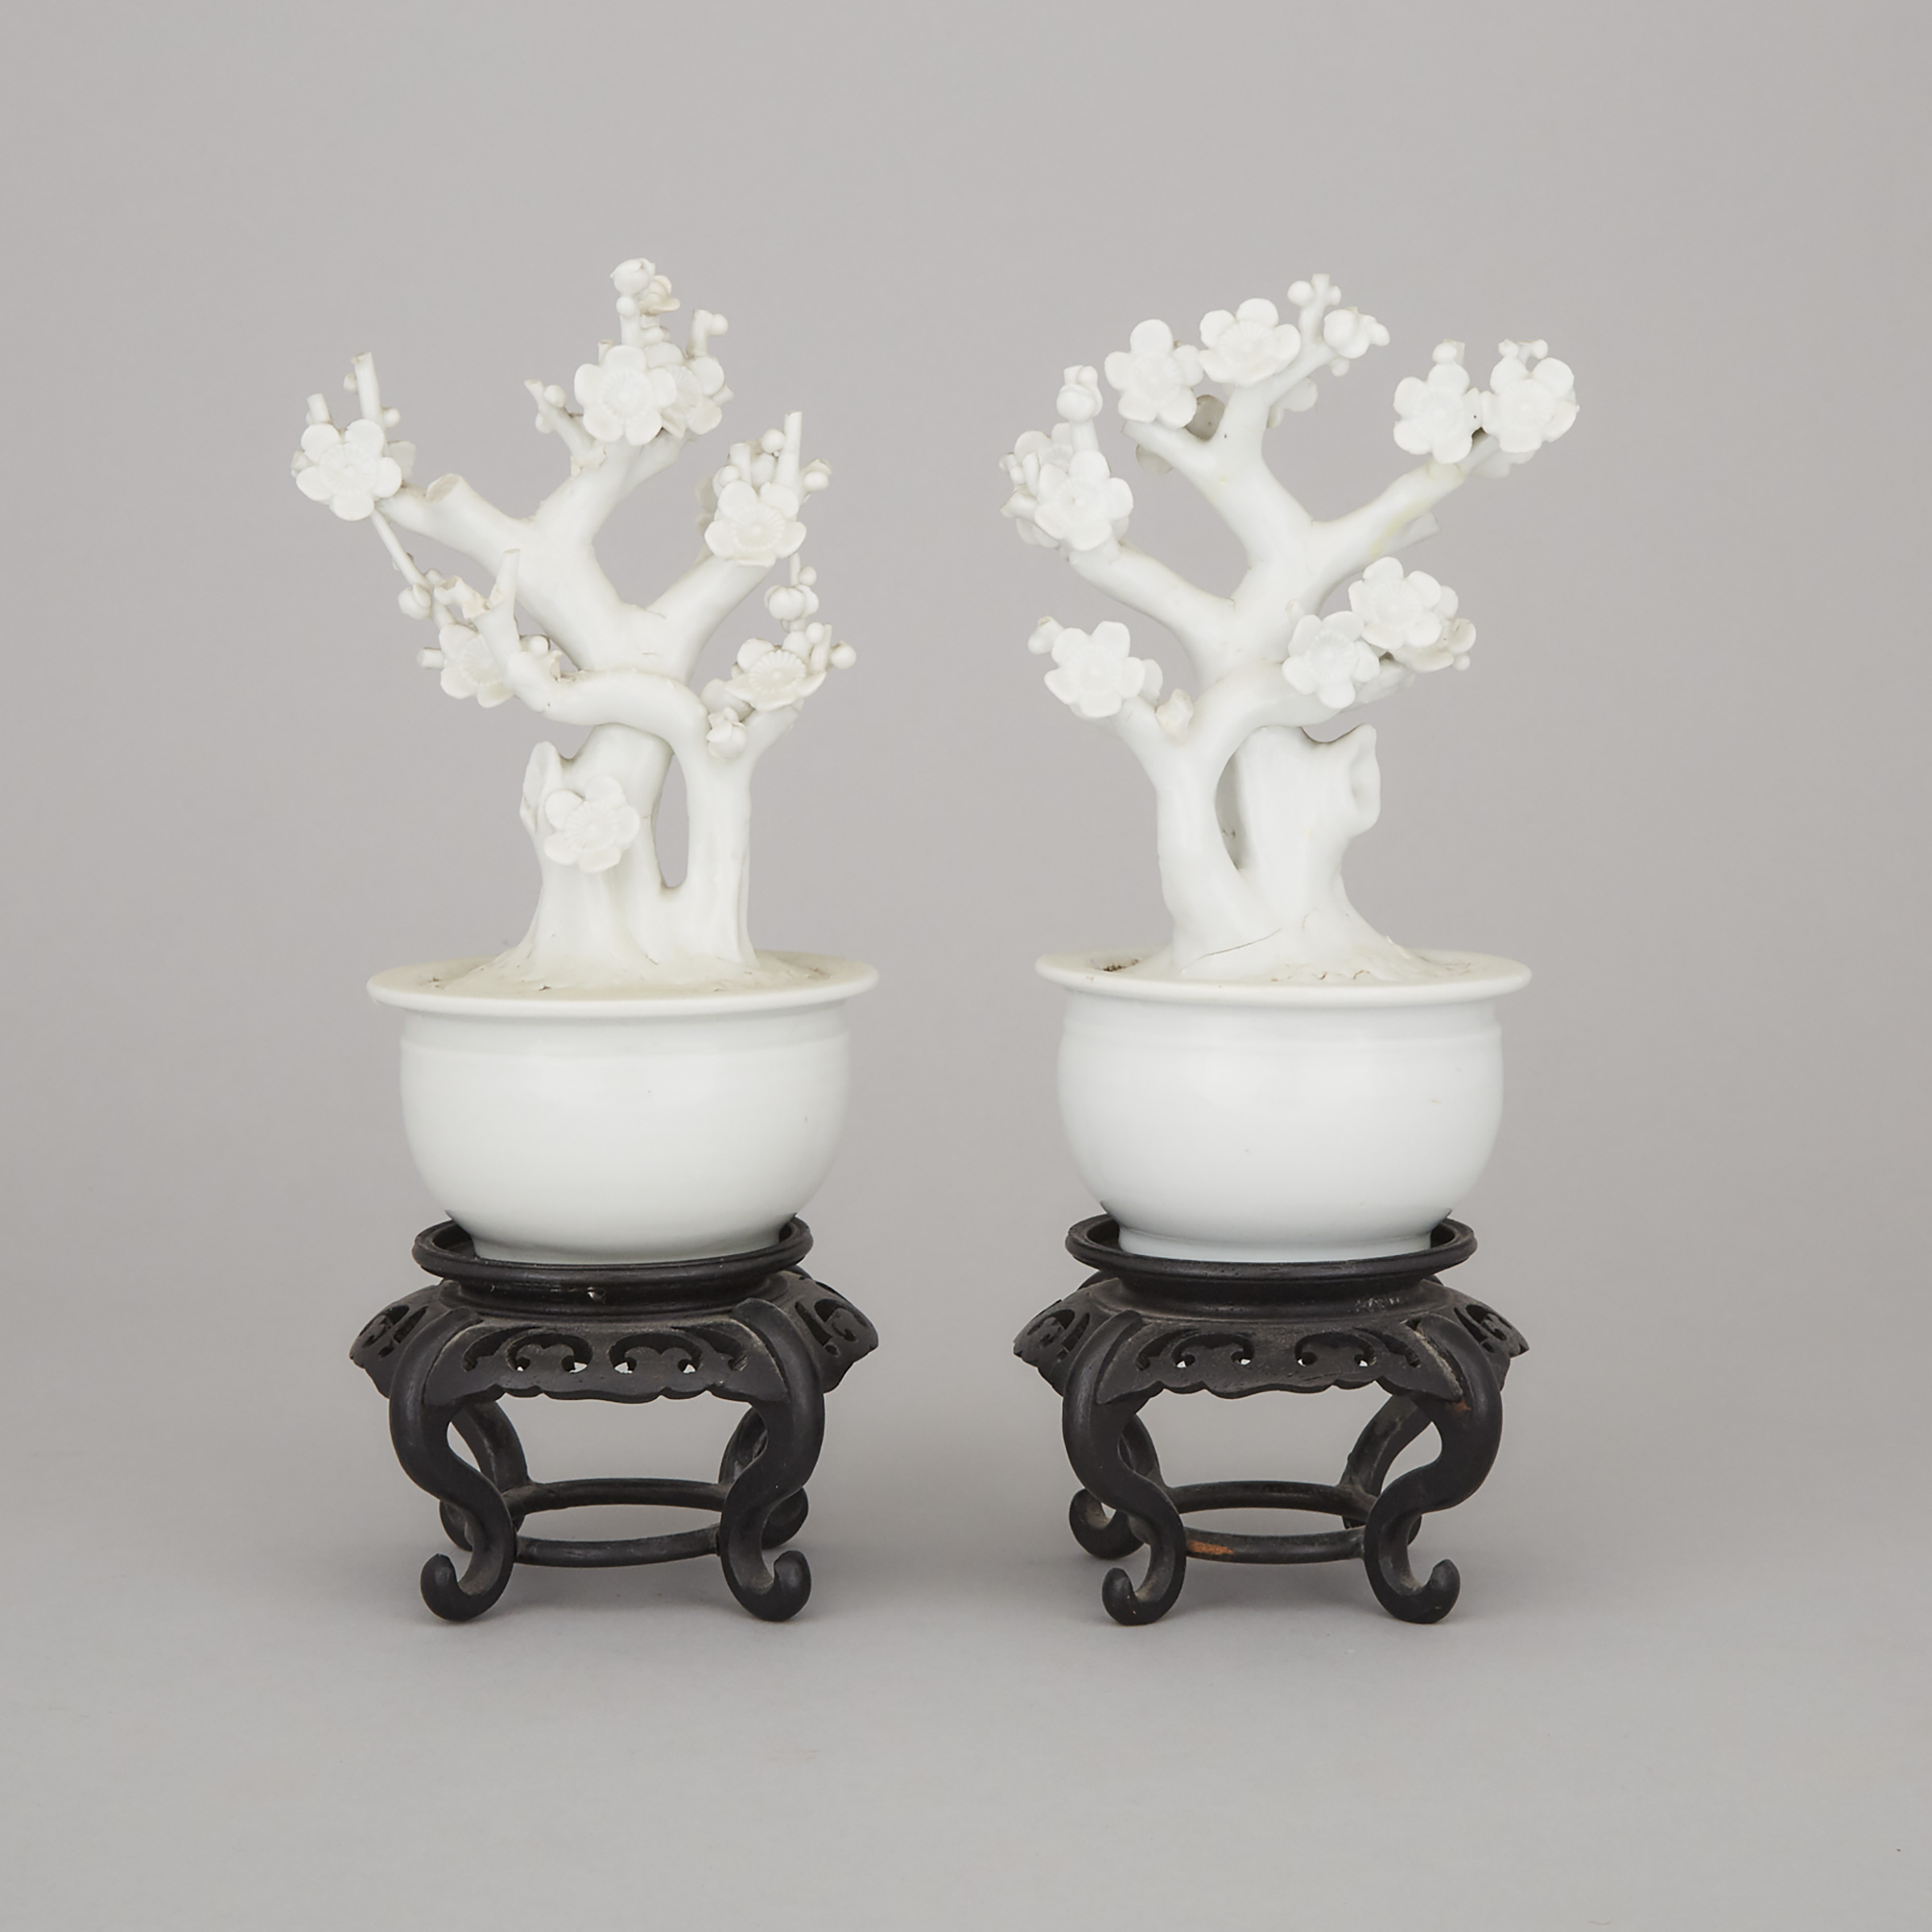 A Pair of Dehua Potted Plants, Qing Dynasty